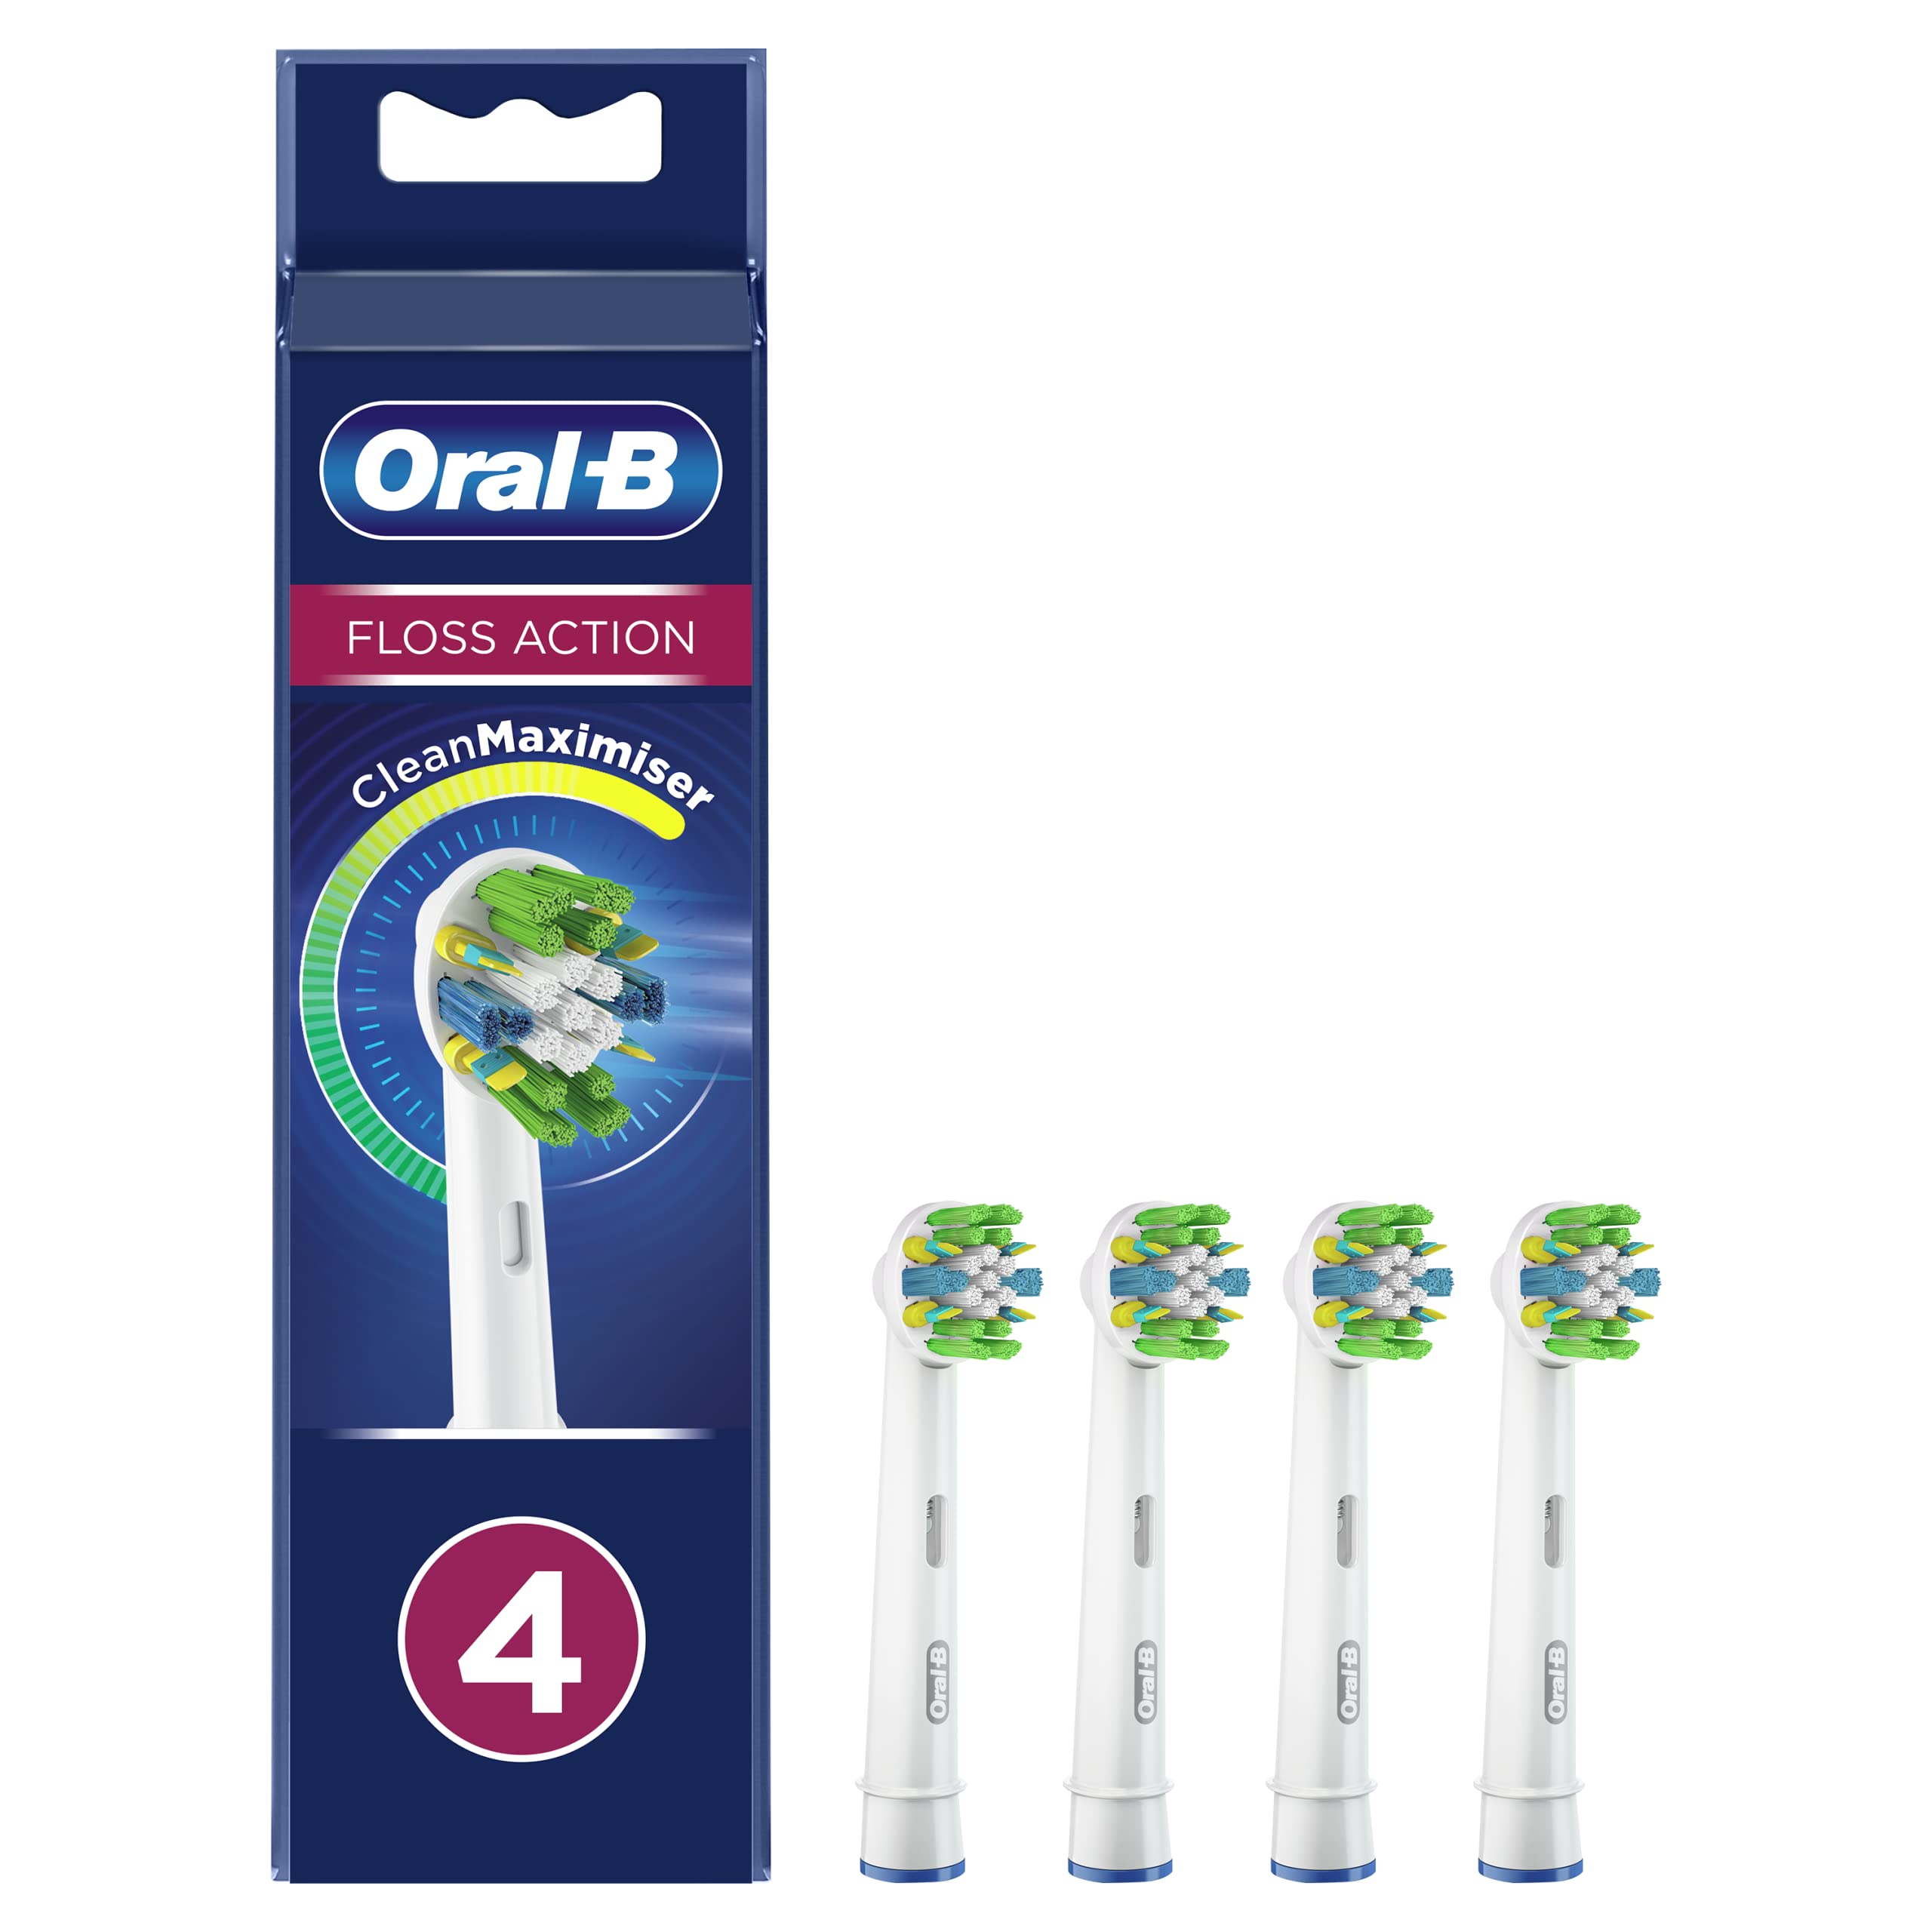 Oral-B Floss Action Electric Toothbrush Head with CleanMaximiser Technology, Angled Bristles for Deeper Plaque Removal, Pack of 4, White